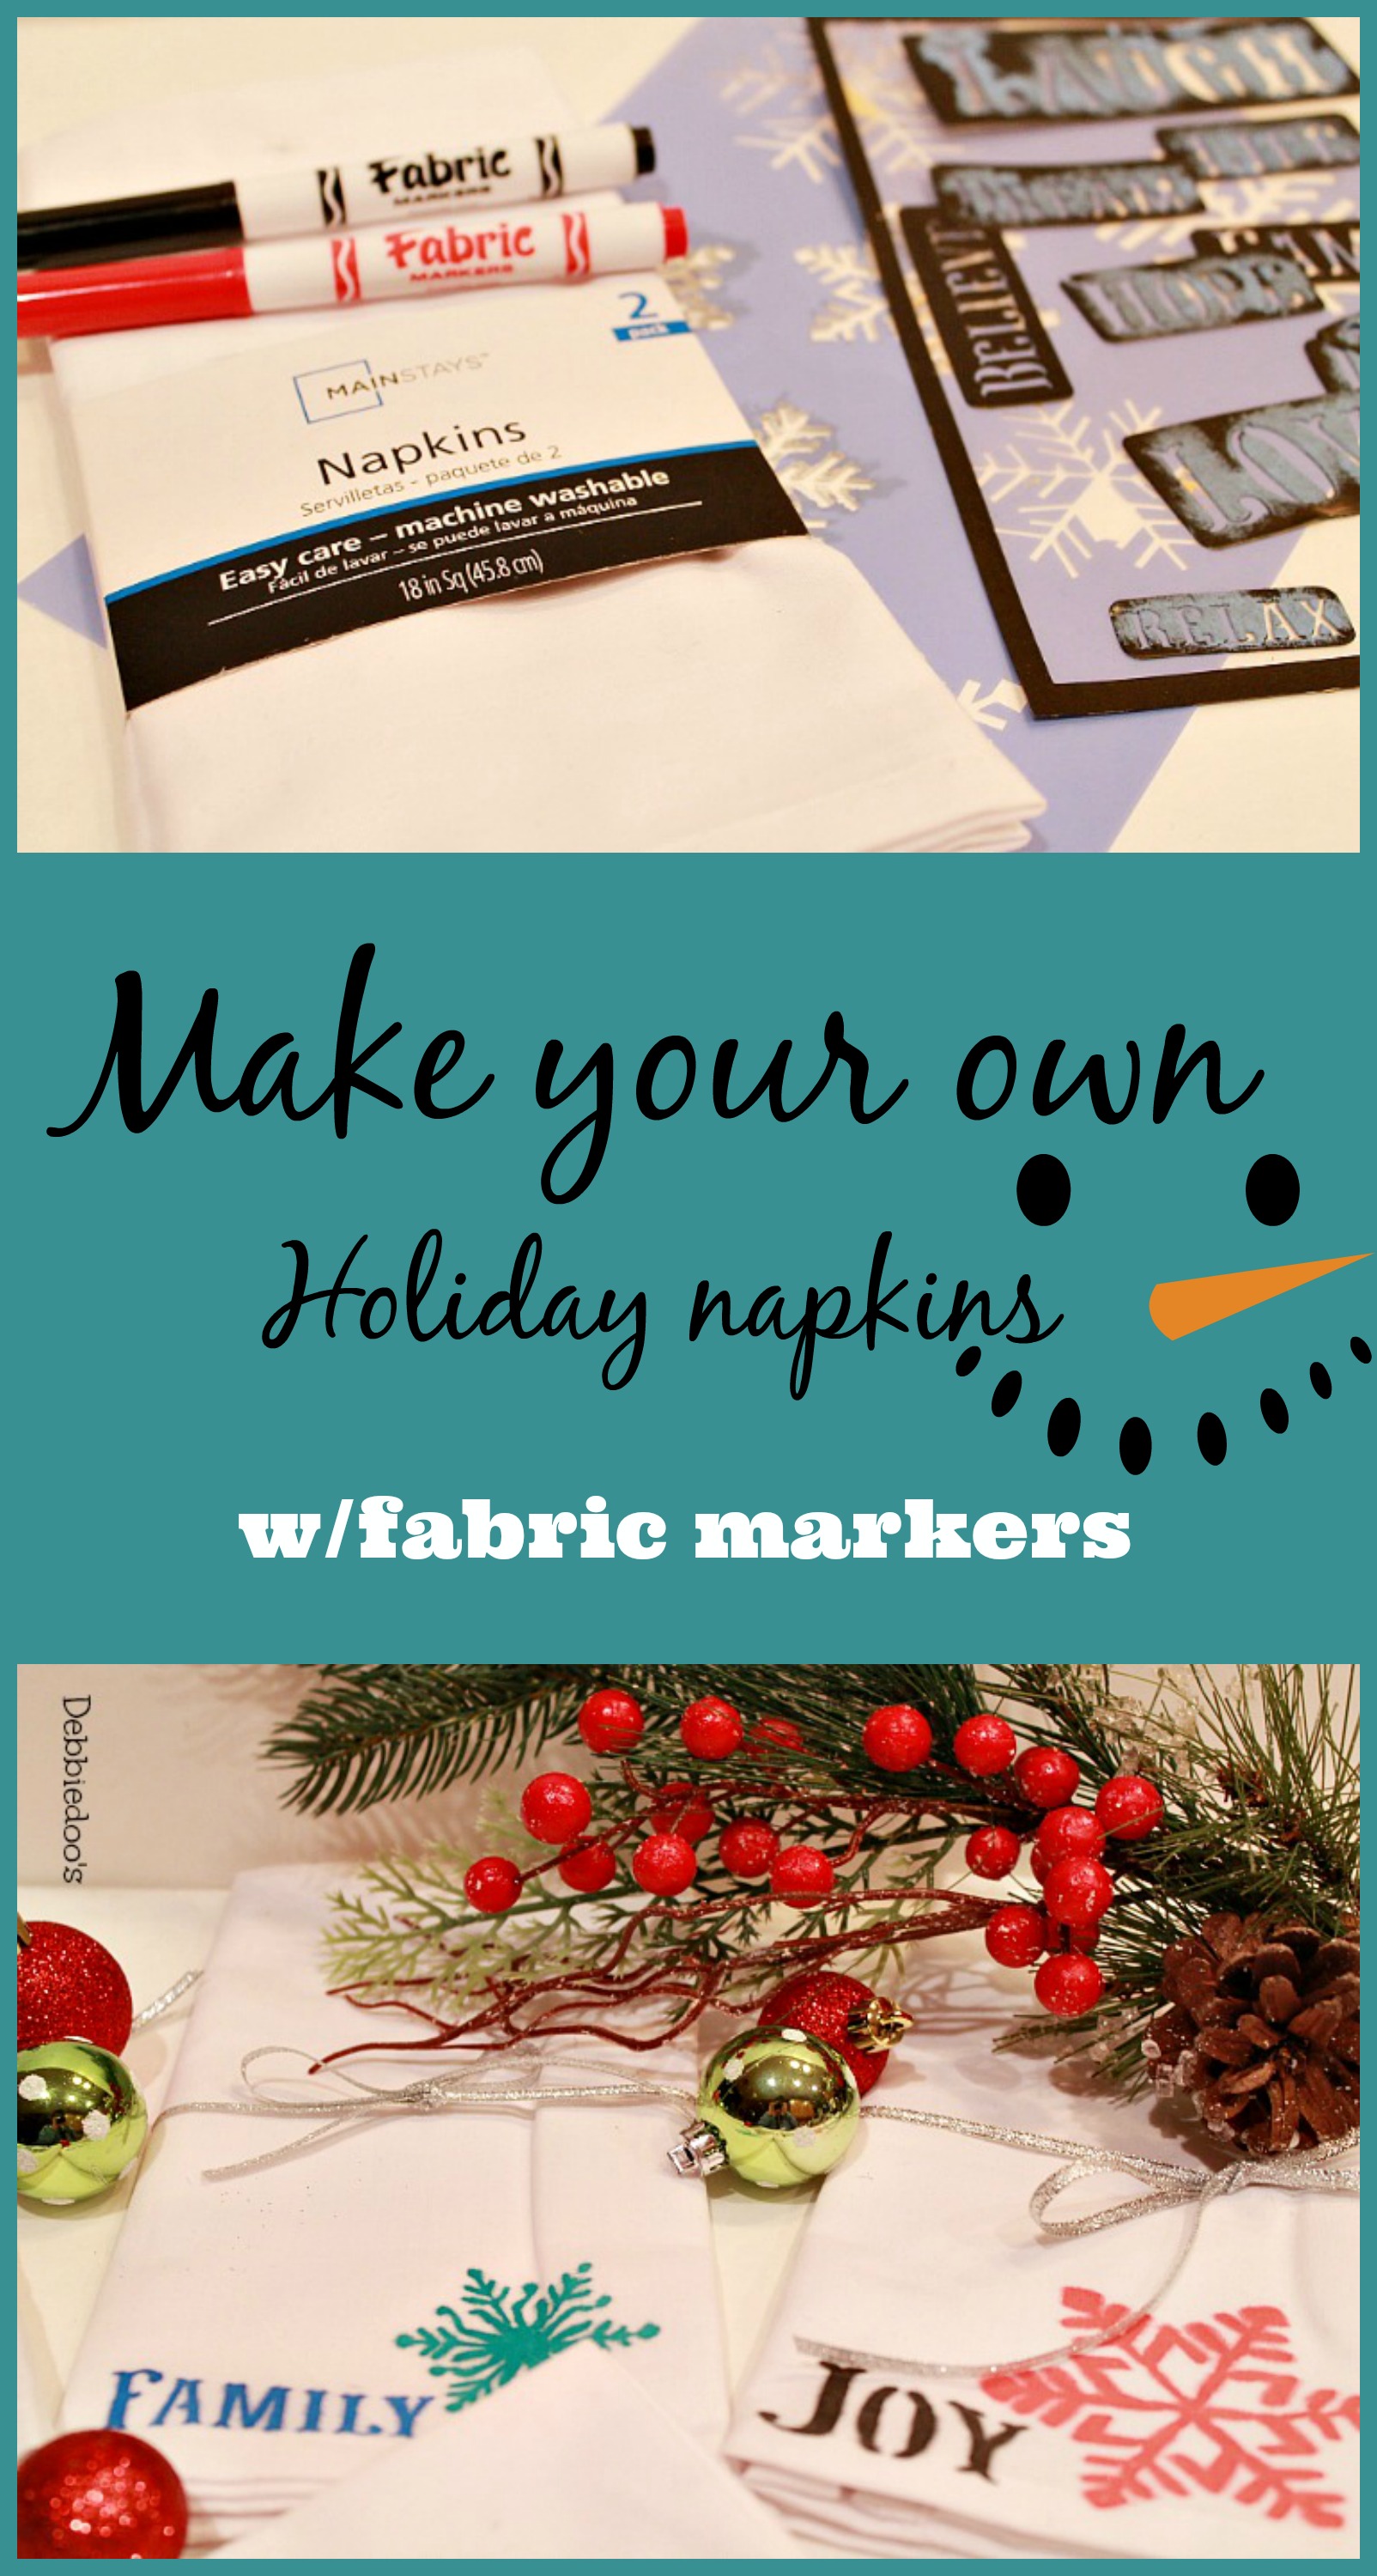 make your own Holiday napkins with fabric markers